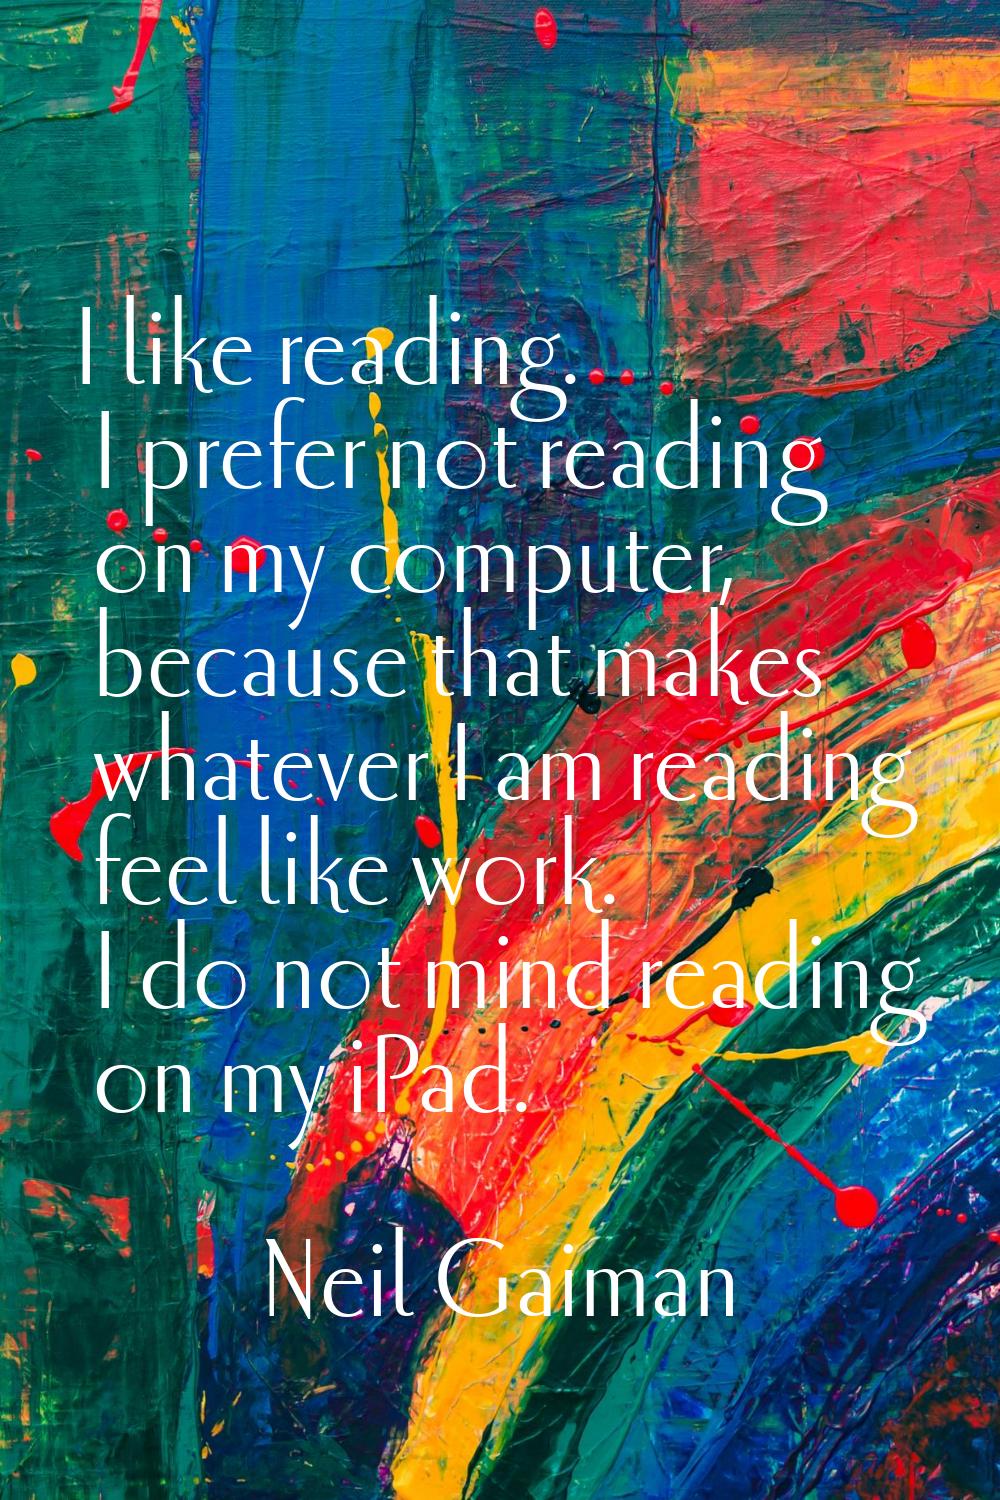 I like reading. I prefer not reading on my computer, because that makes whatever I am reading feel 